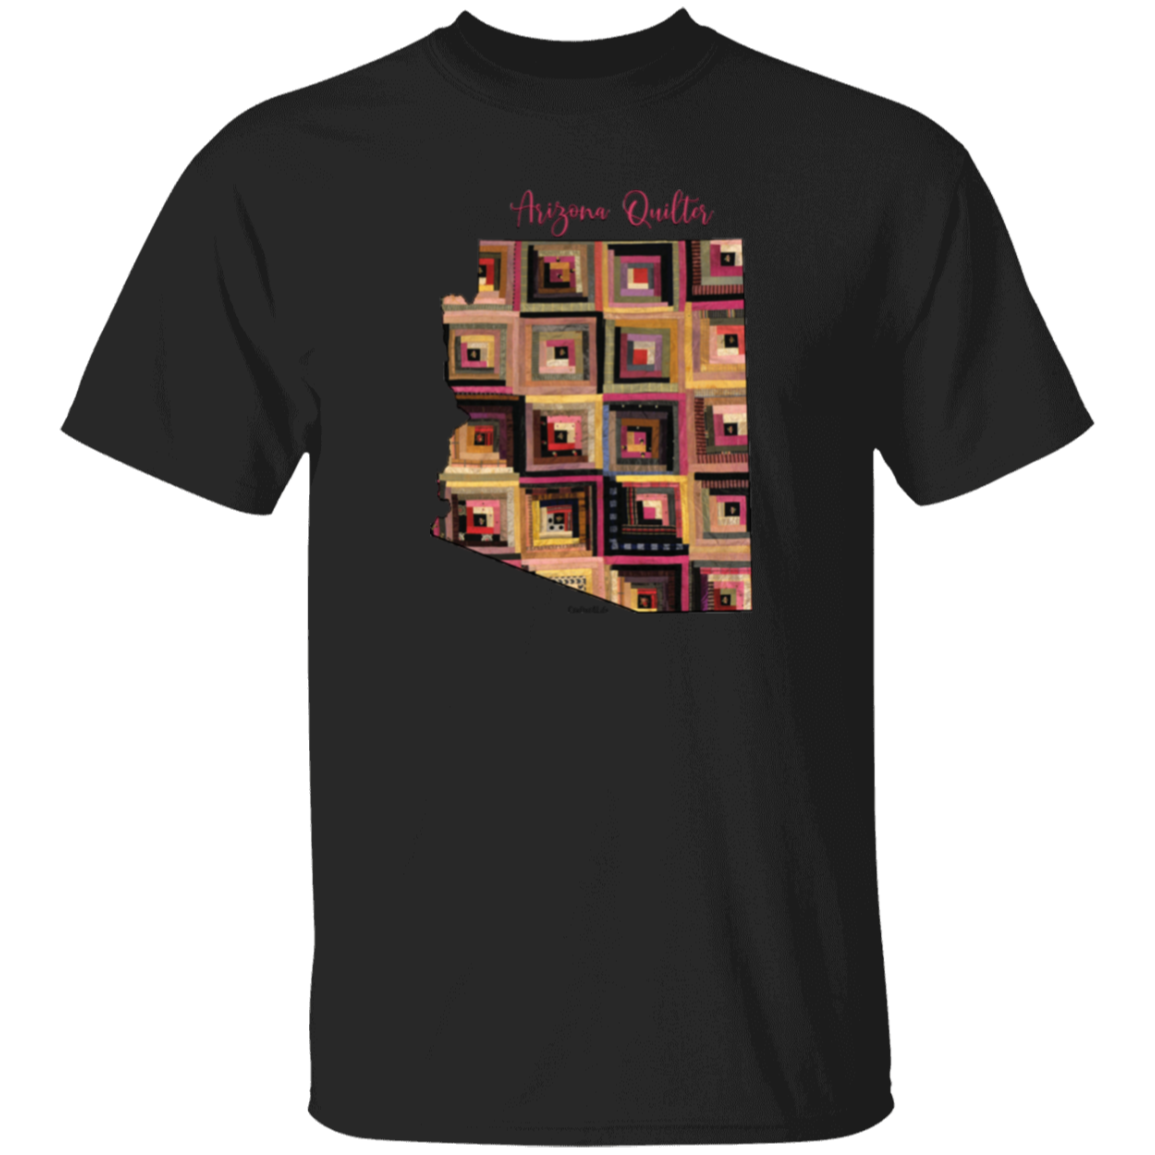 Arizona Quilter T-Shirt, Gift for Quilting Friends and Family